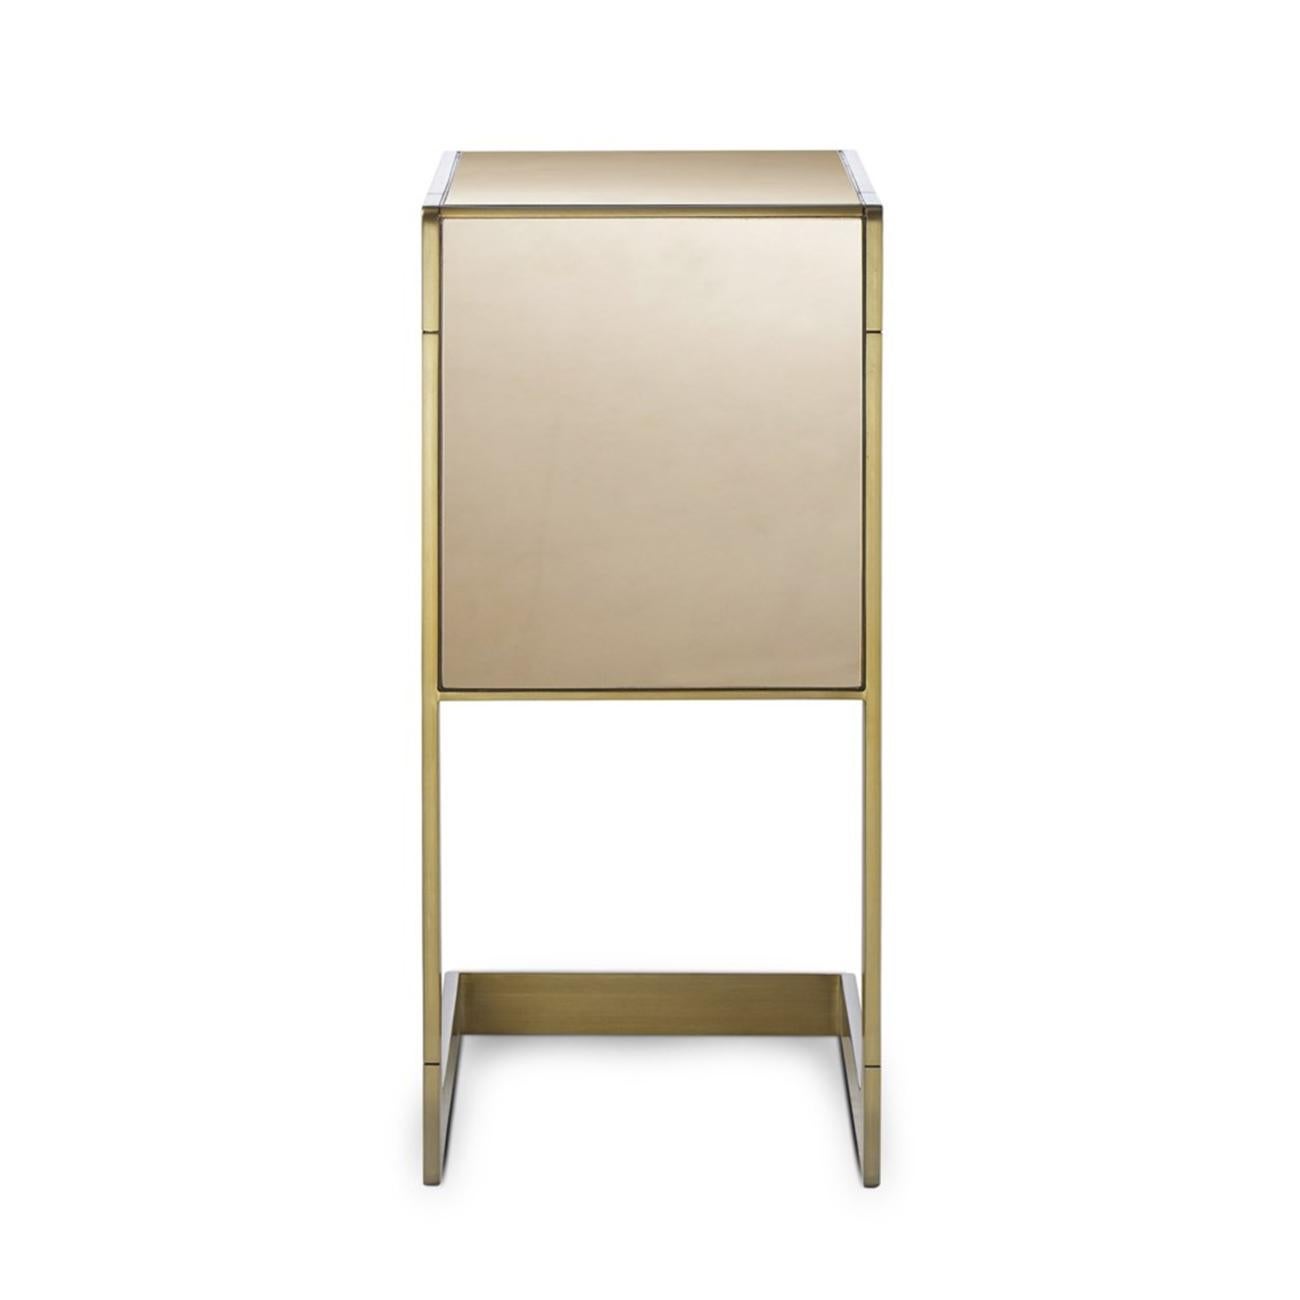 English Sturdy Small Side Table in Satin Brass Finish